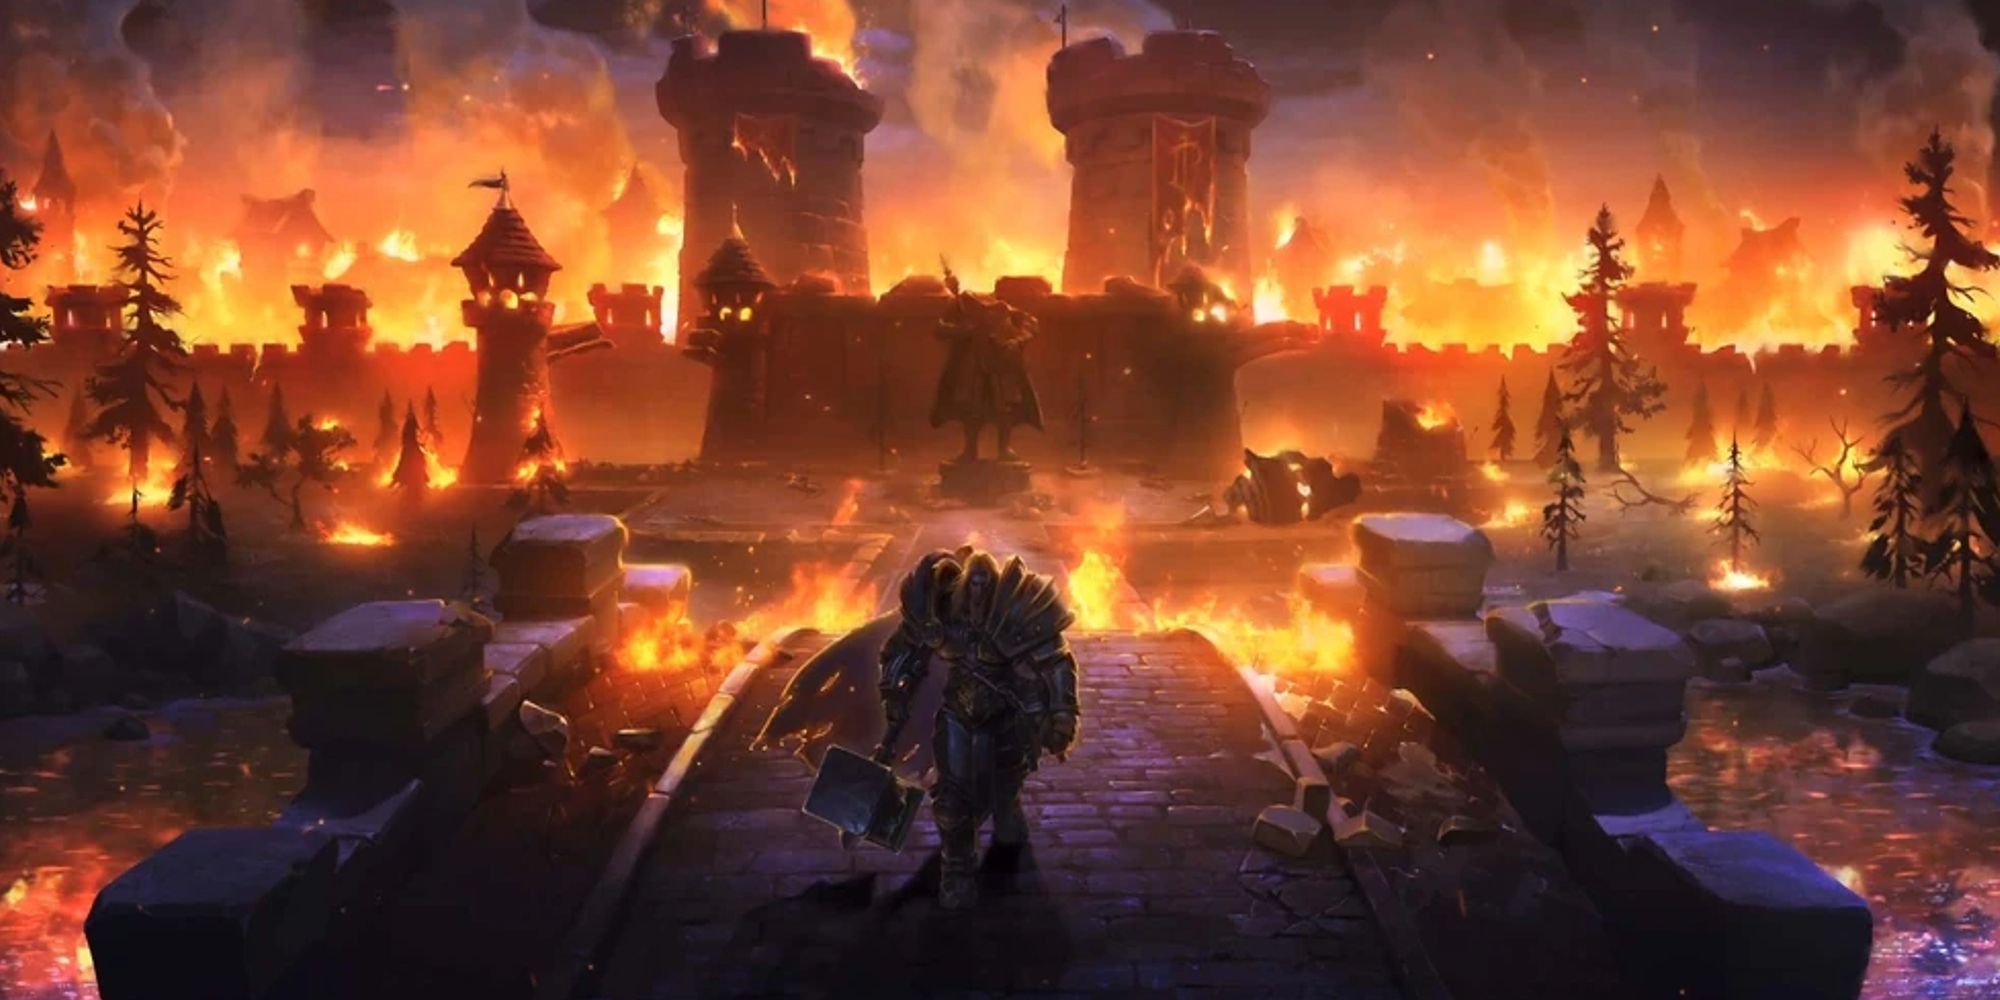 Arthas walks away from Statholme after the purge while the kingdom burns in World of Warcraft